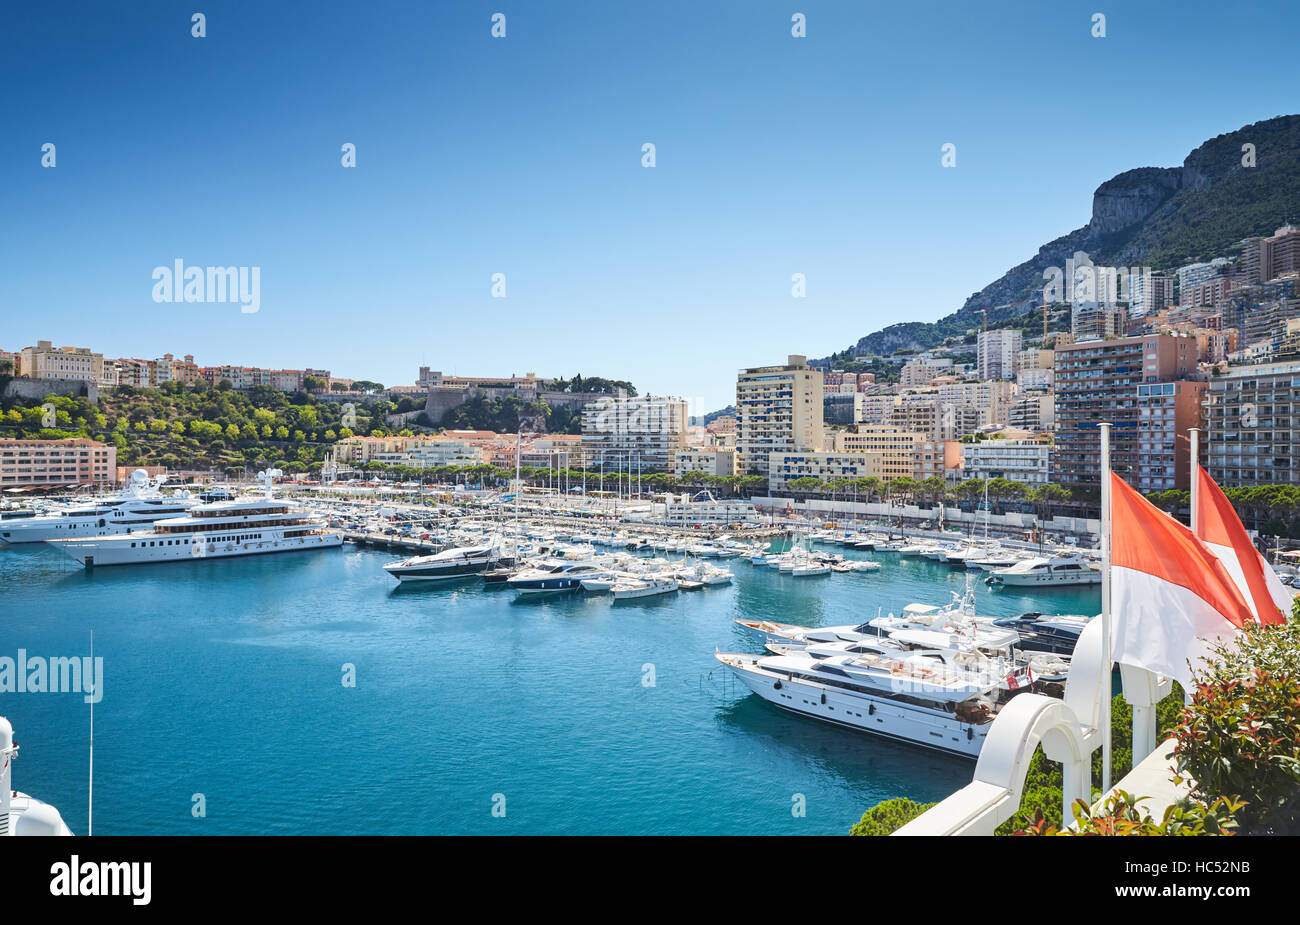 Monaco, Monte-Carlo, Monaco Ville, 8 August 2016: Port Hercules, the preparation of the yacht show MYS, sunny day, many yachts Stock Photo